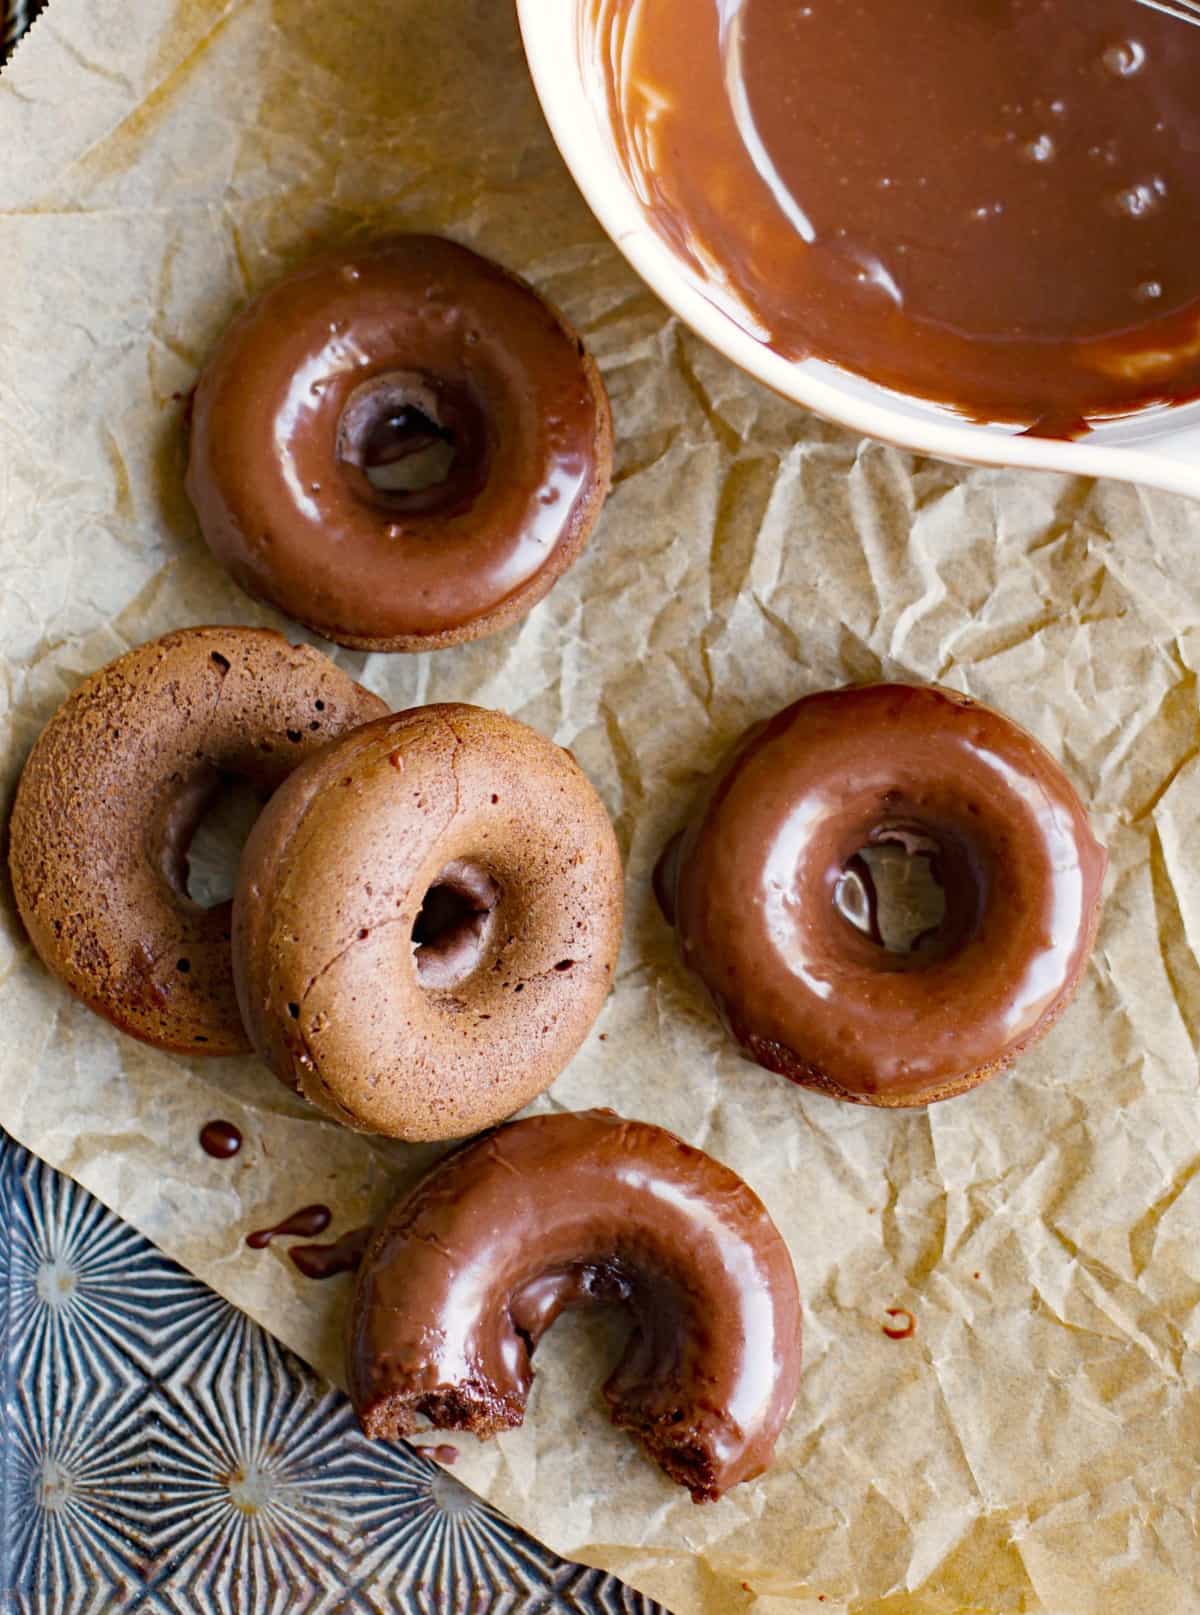 Chocolate Buttermilk Baked Donuts on a piece of brown parchment paper in a vintage baking pan.